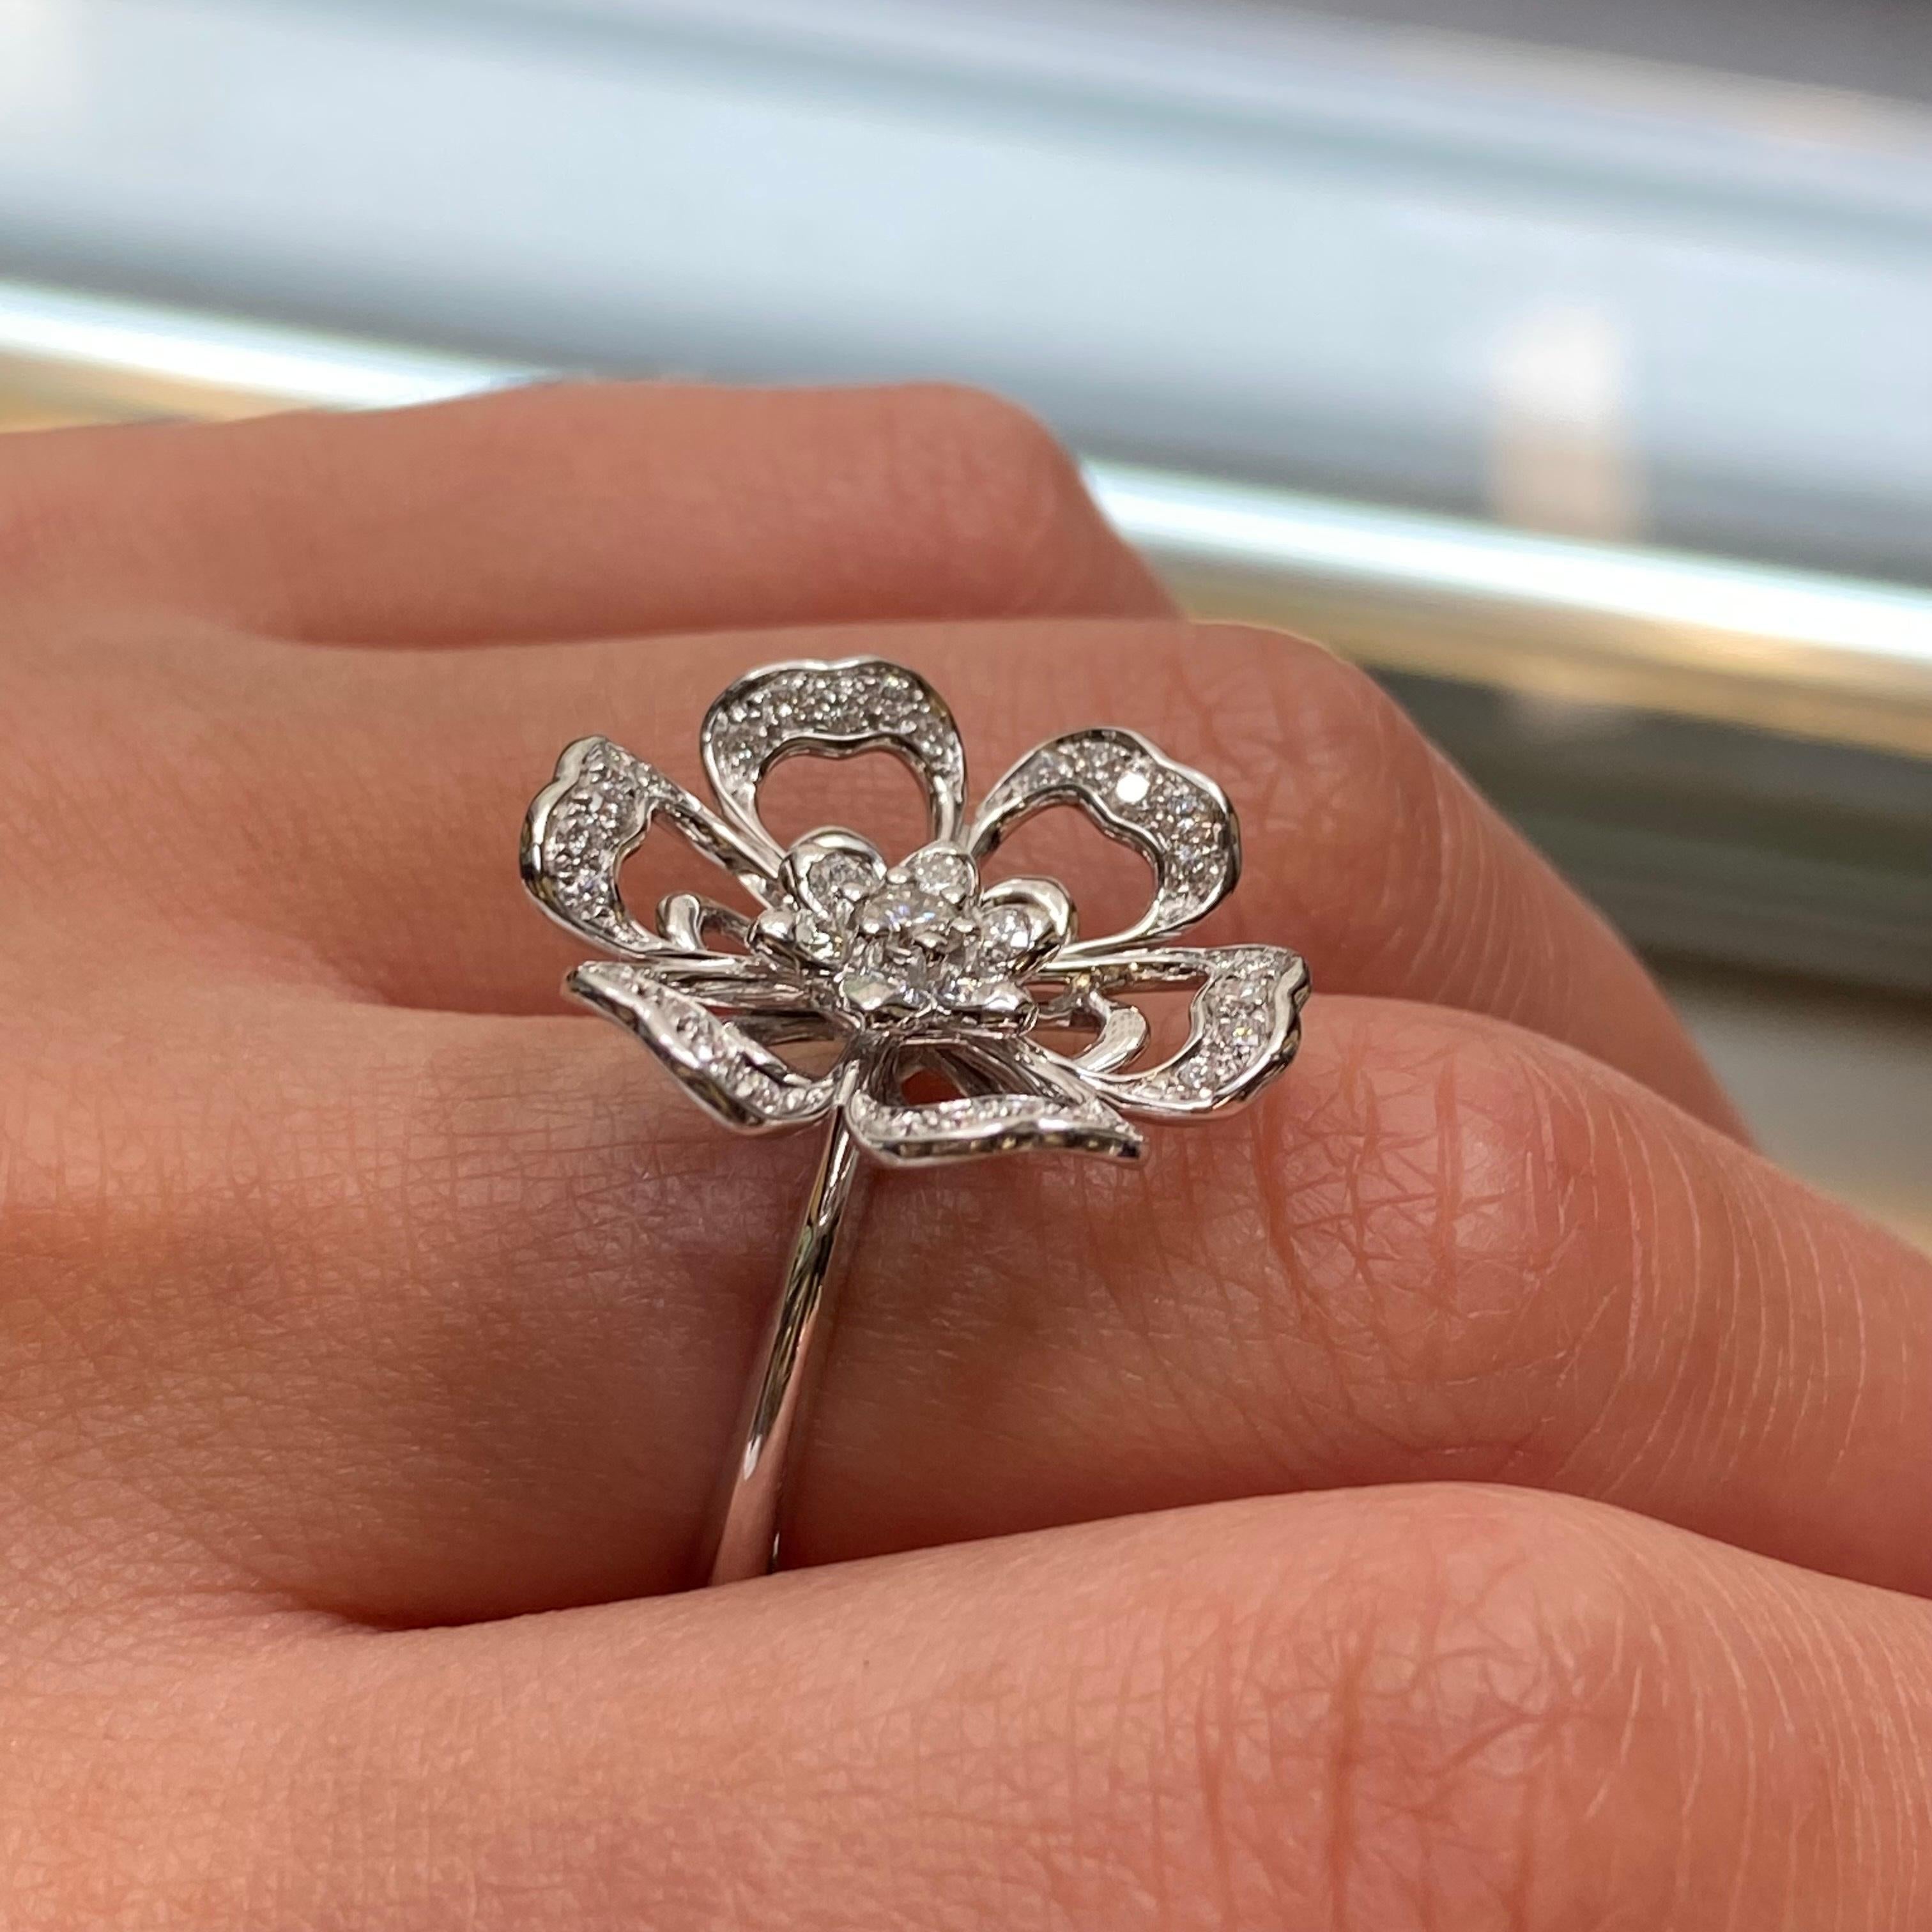 Luca Carati Diamond Cocktail Ring 18K White Gold 0.68 Cttw In New Condition For Sale In New York, NY